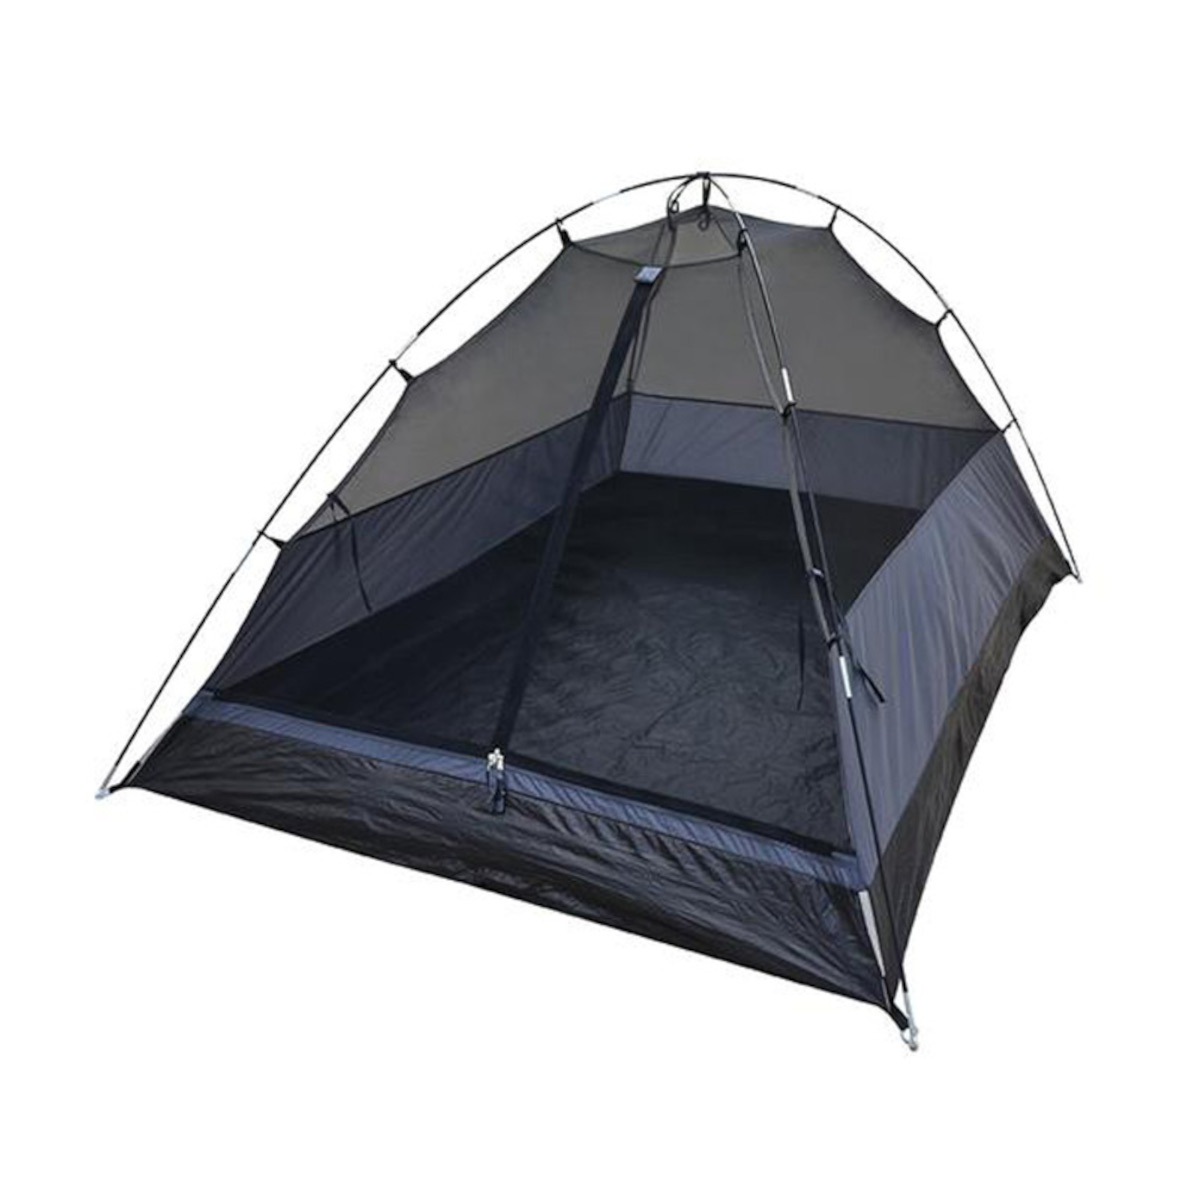 Oztrail Genesis 2-person Dome Tent-camping tent